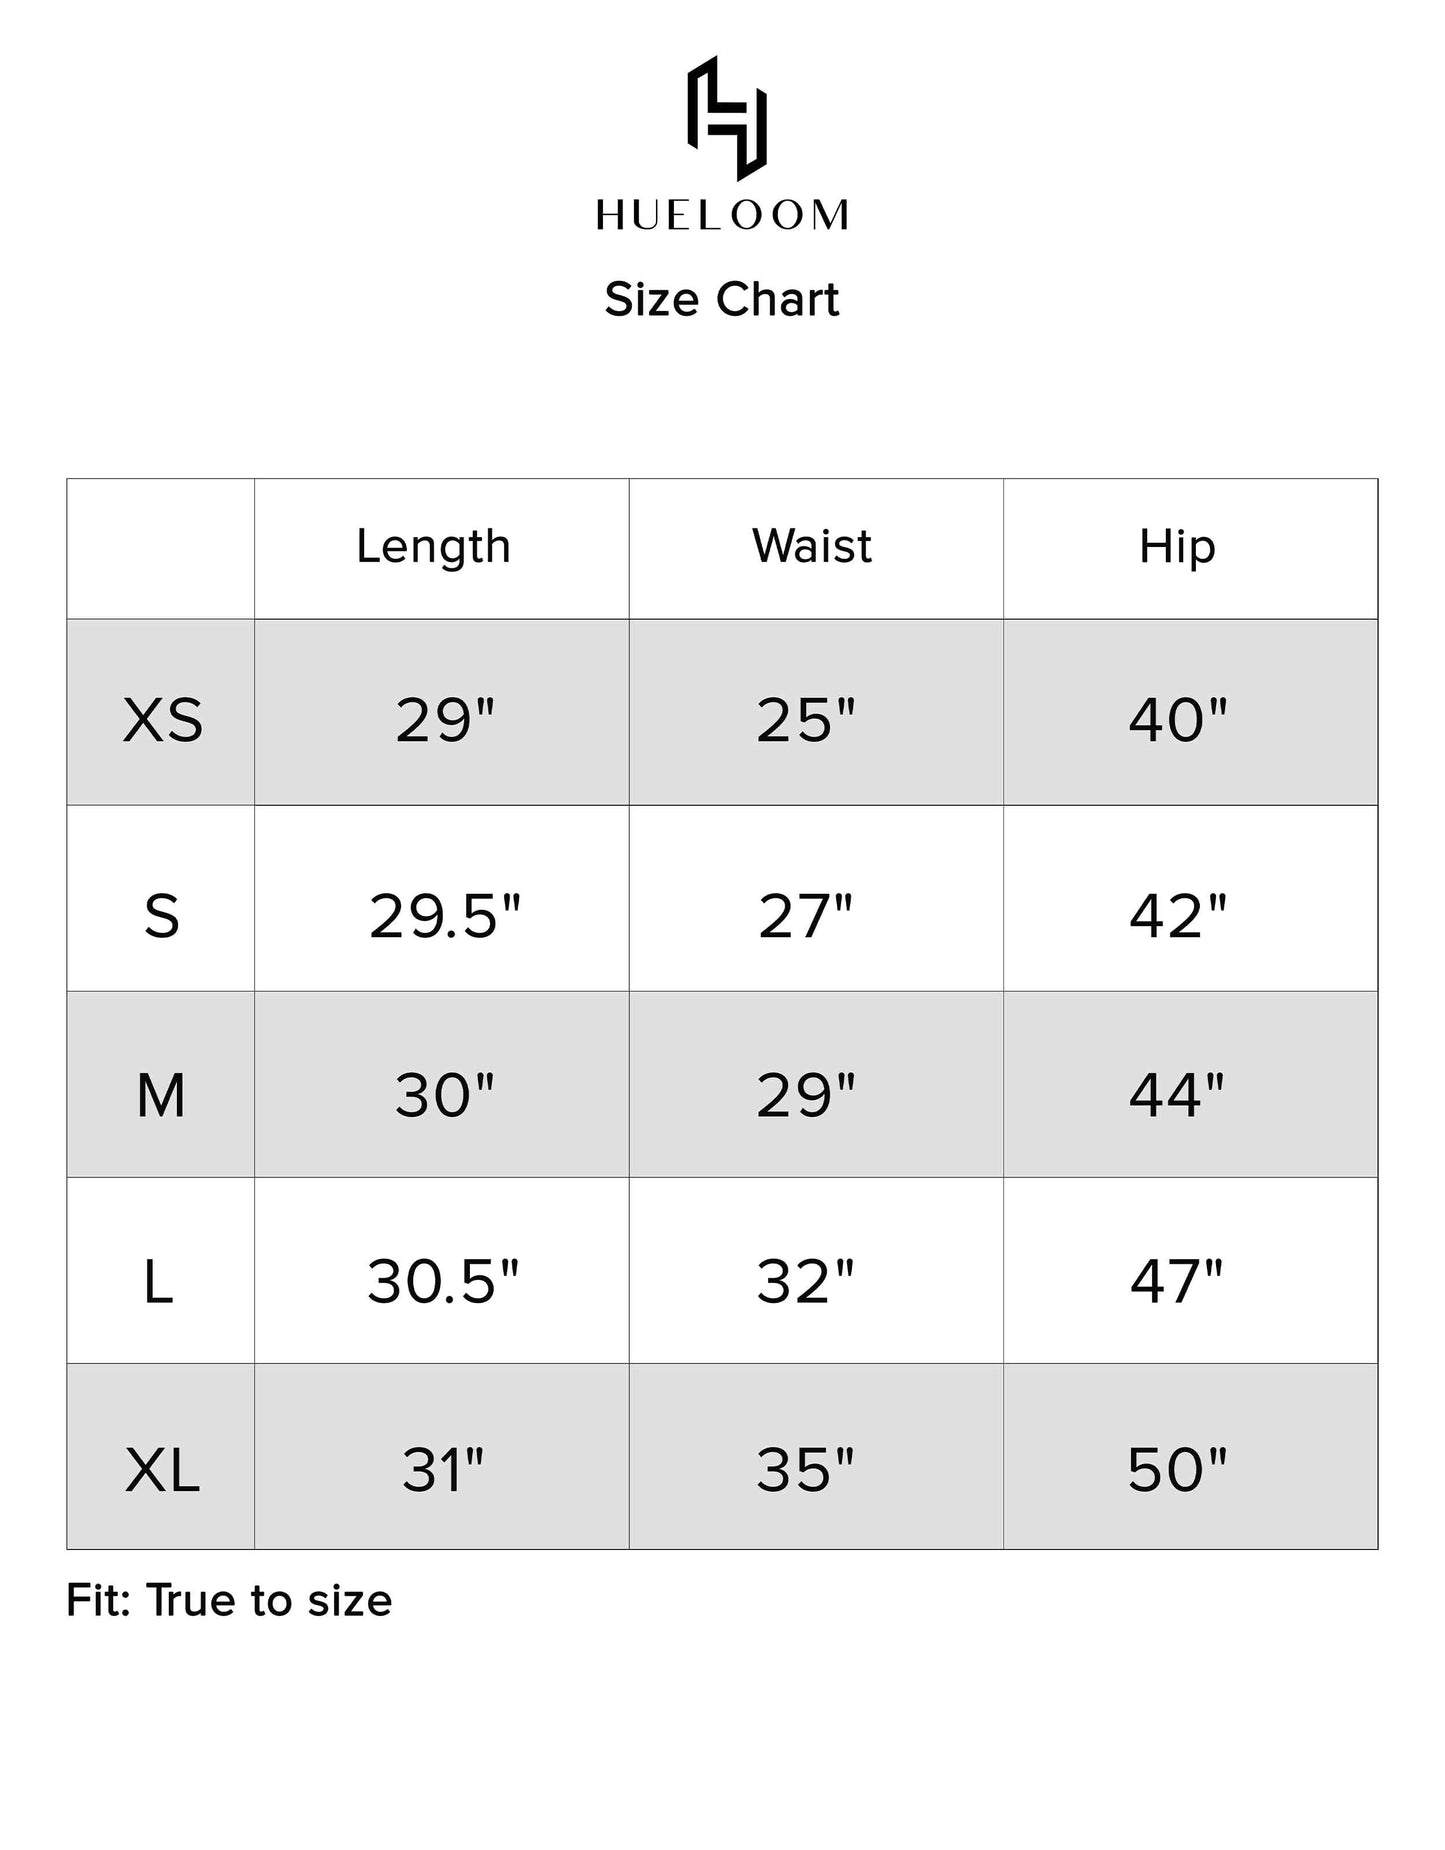 Hueloom's Reversible Midi Skirt's size chart guide for sizes XS, S, M, L, XL